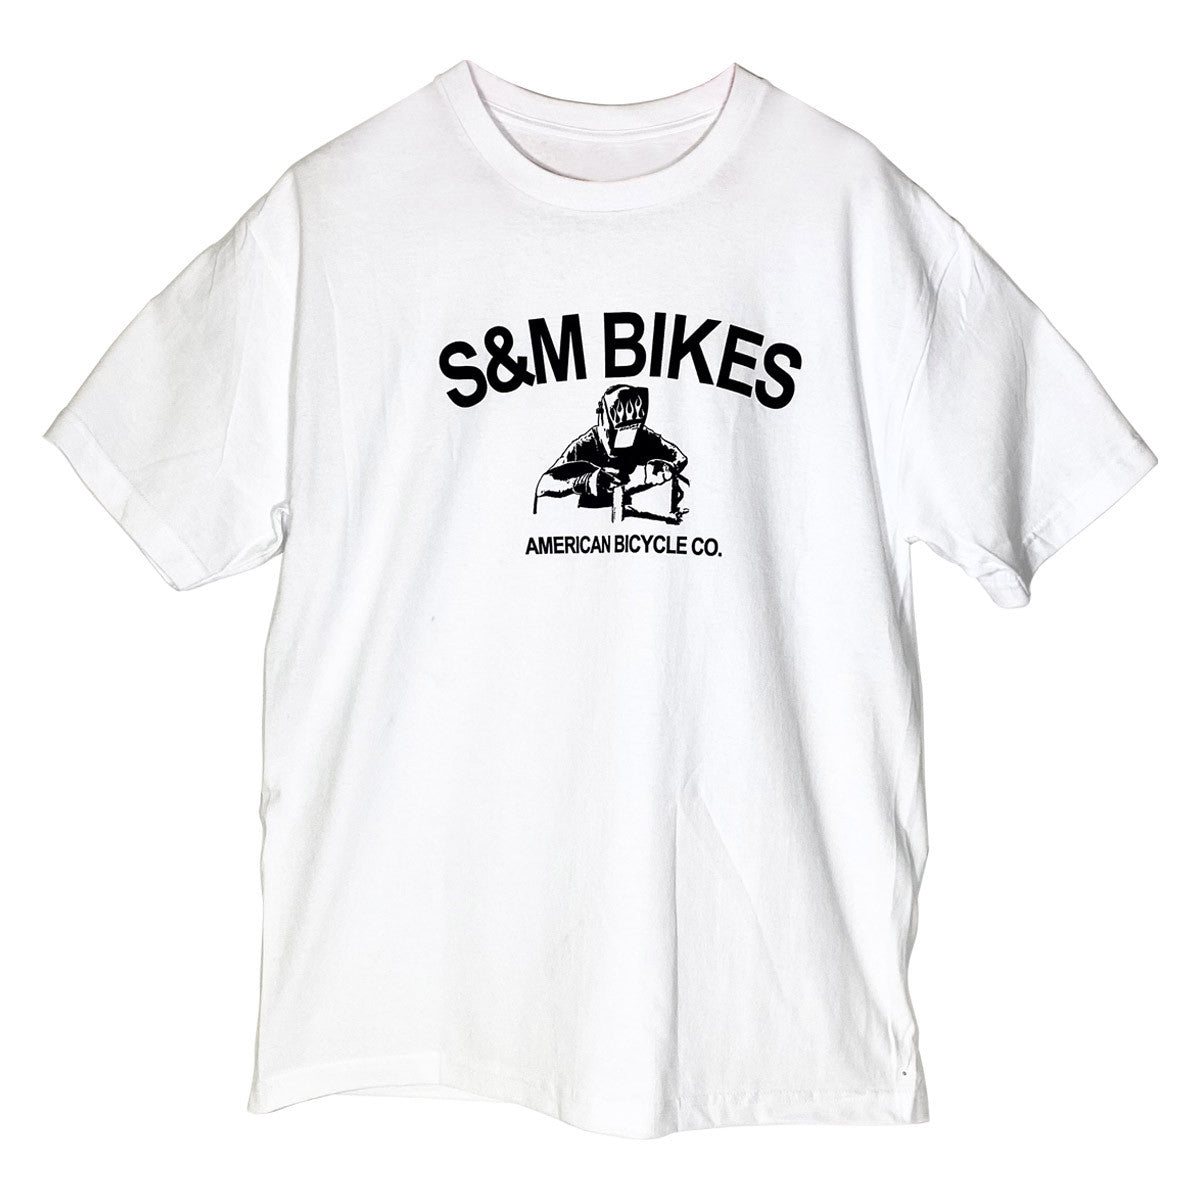 Motorcycle Shop T-Shirt: White's Boots, Inc.